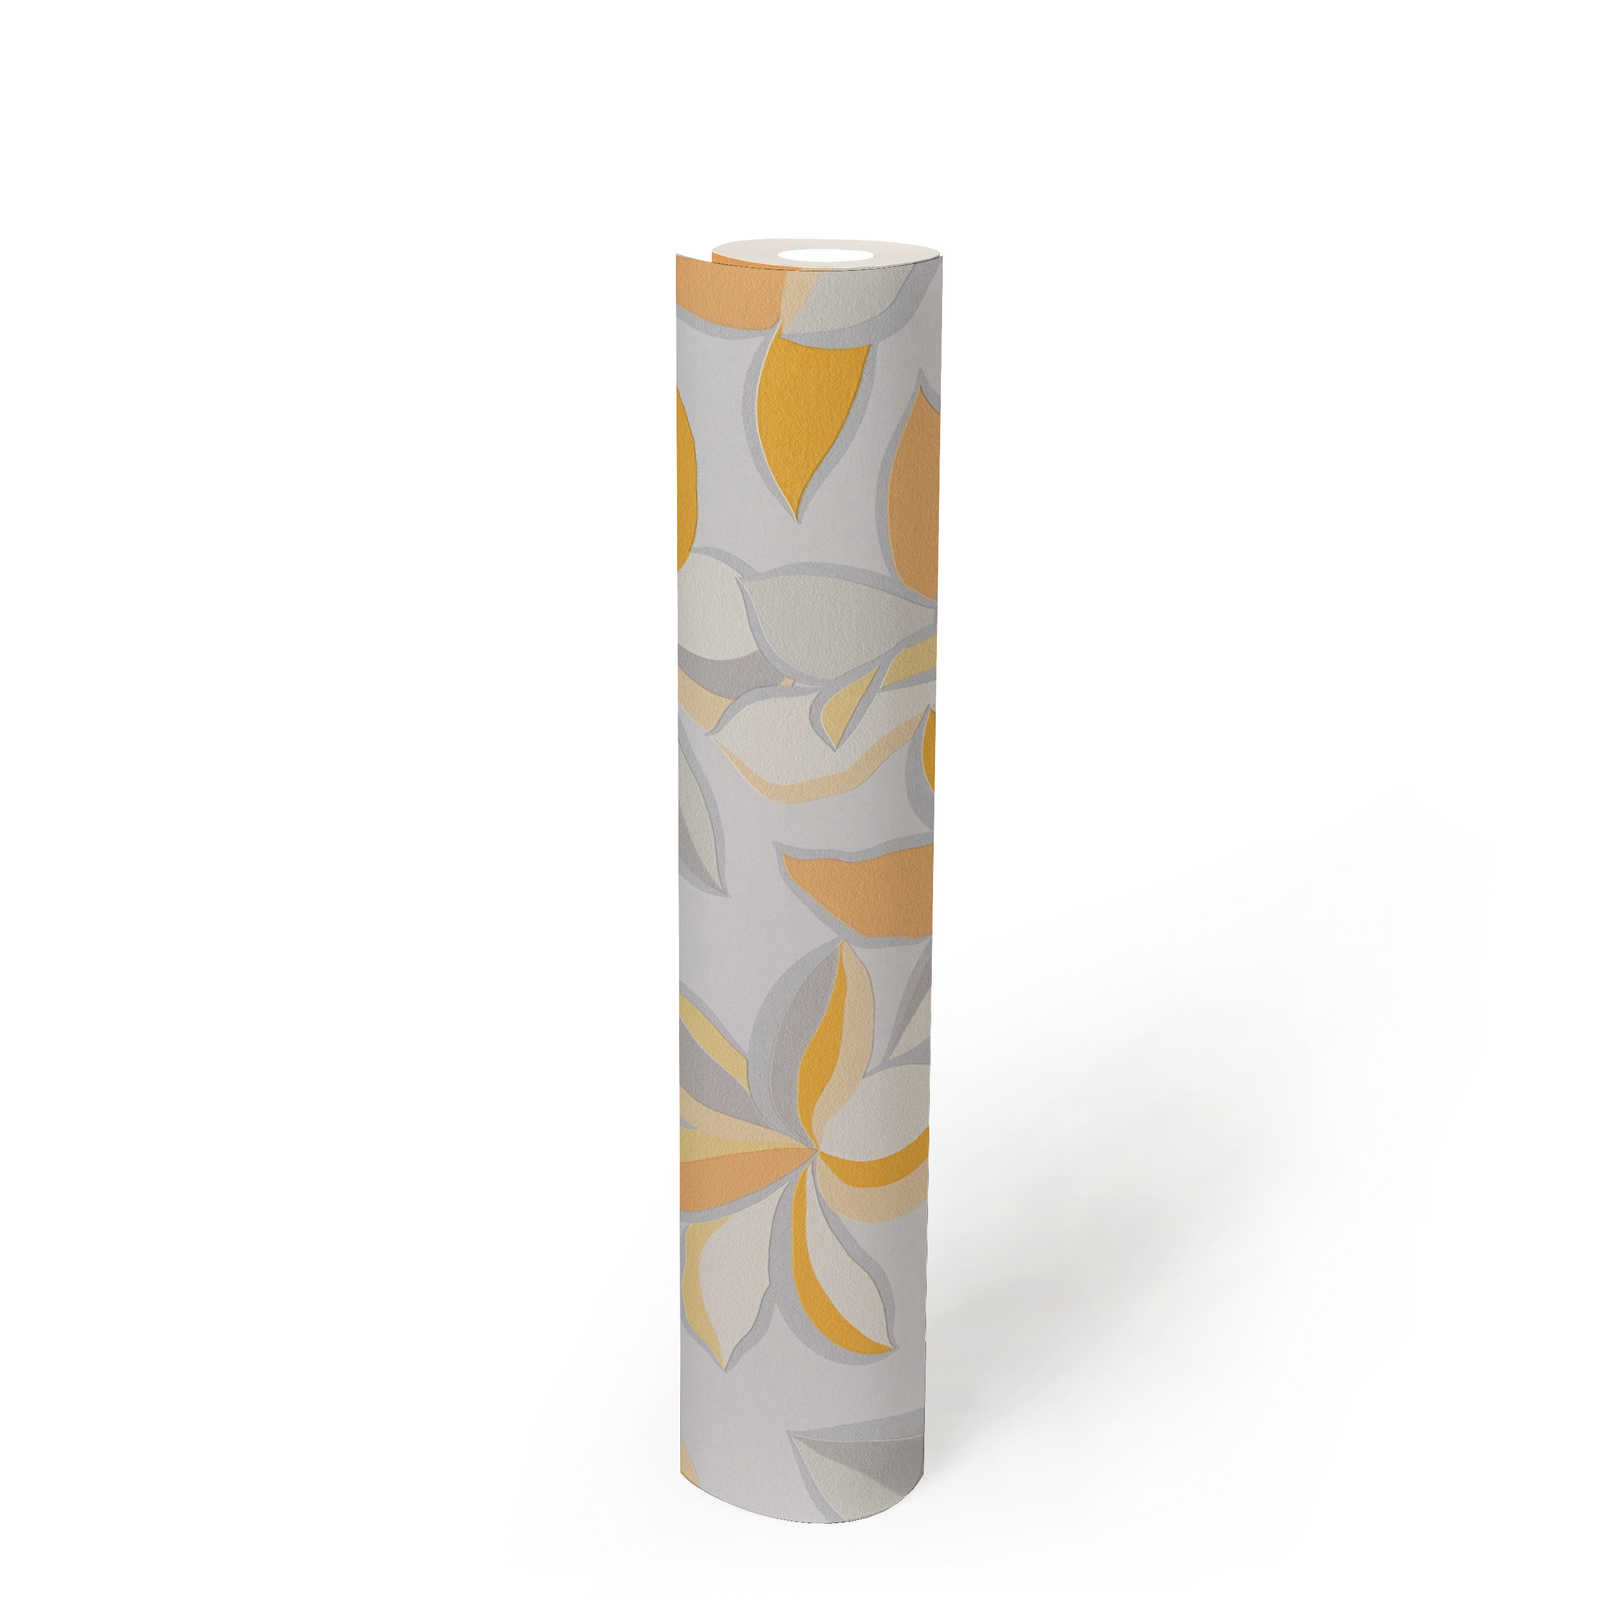             Non-woven wallpaper with floral pattern & metallic look - yellow, orange, grey
        